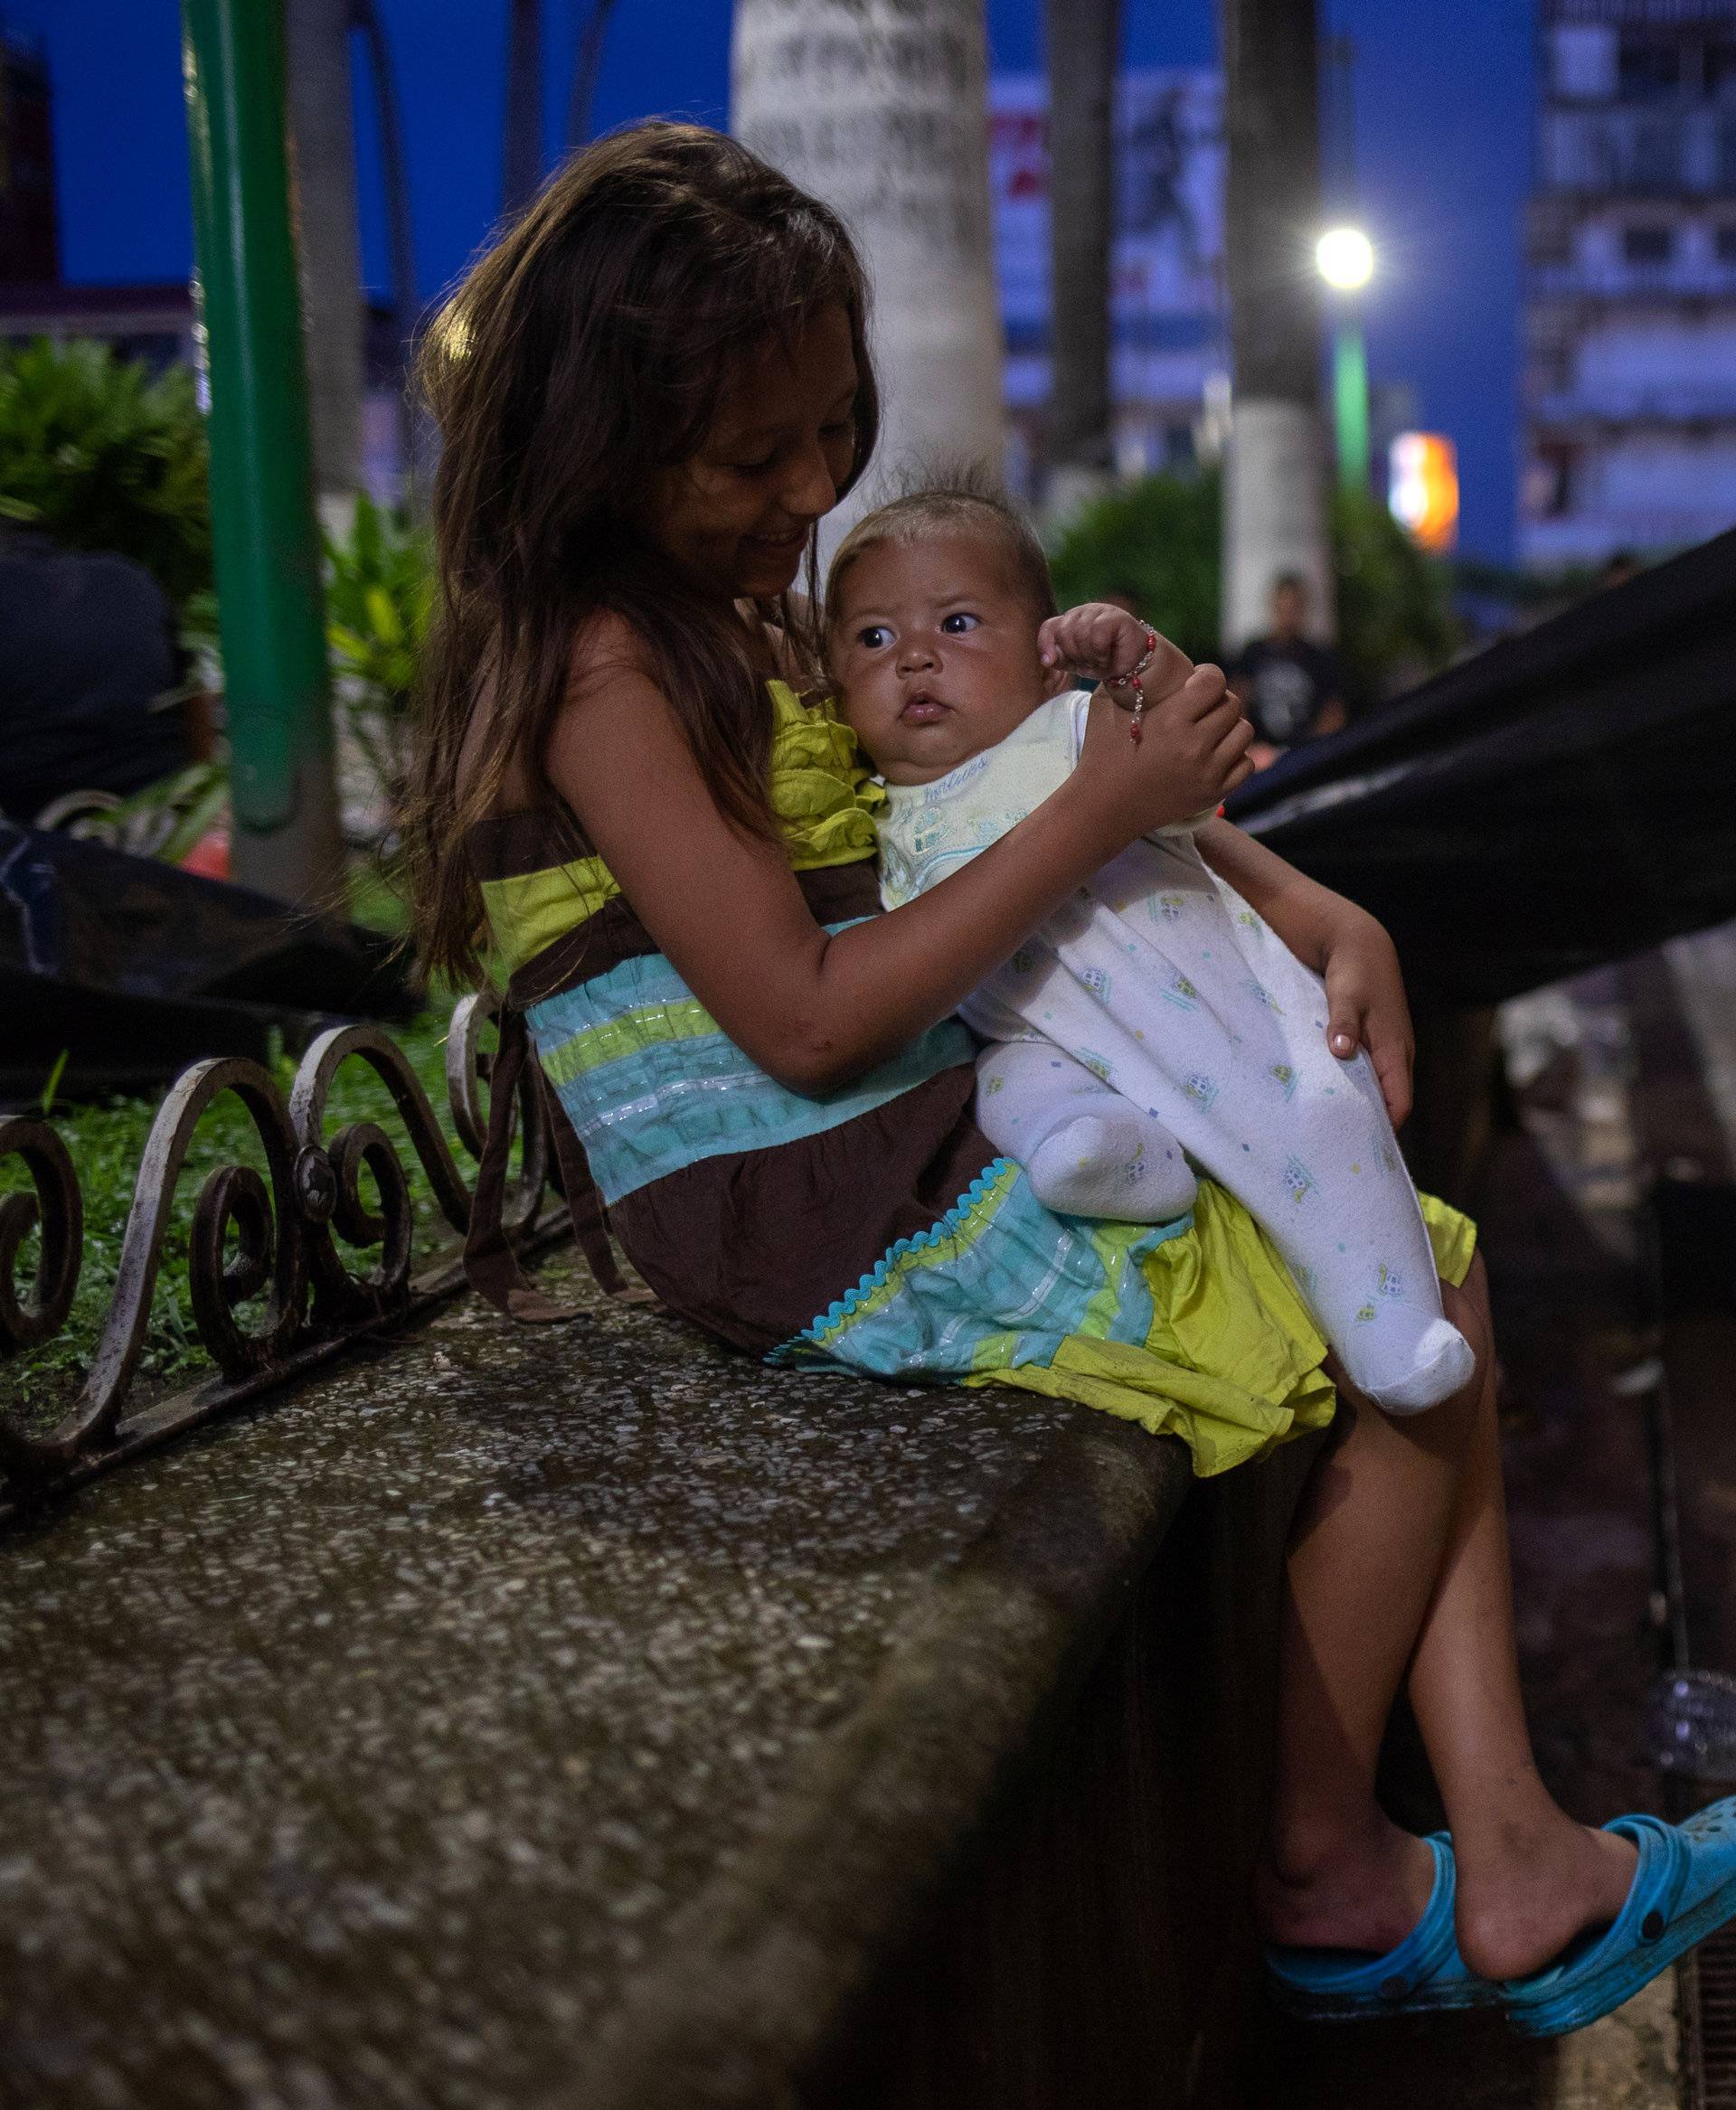 Girl holds sister amid caravan of migrants from Central America taking a rest while en route to U.S., in Tapachula, Mexico